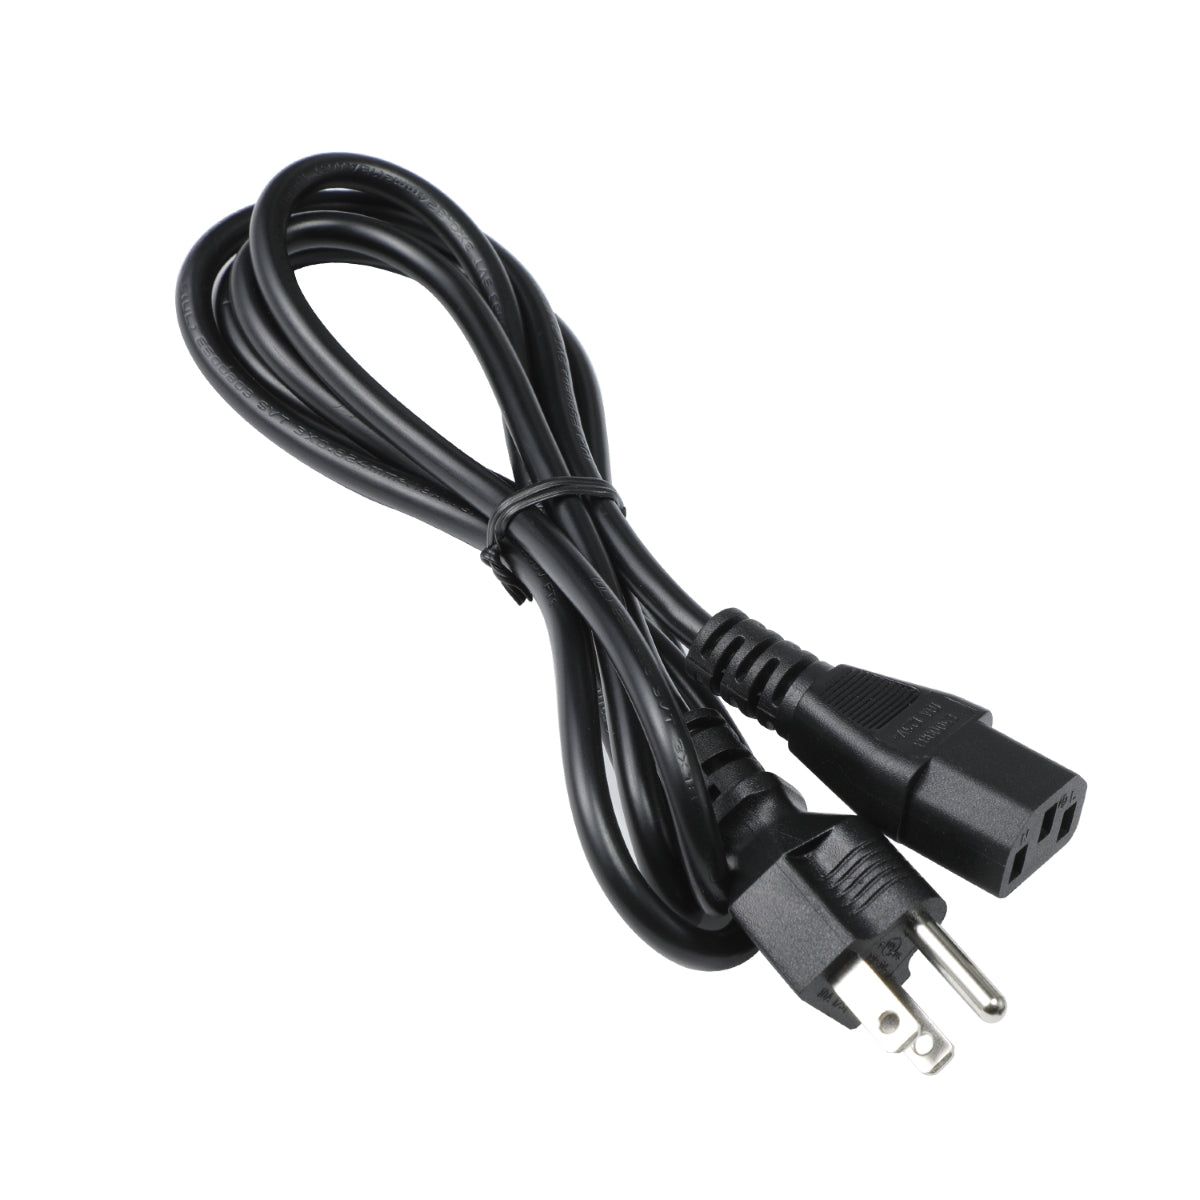 Power Cord for Samsung LS32A700NWNXZA Monitor TV.